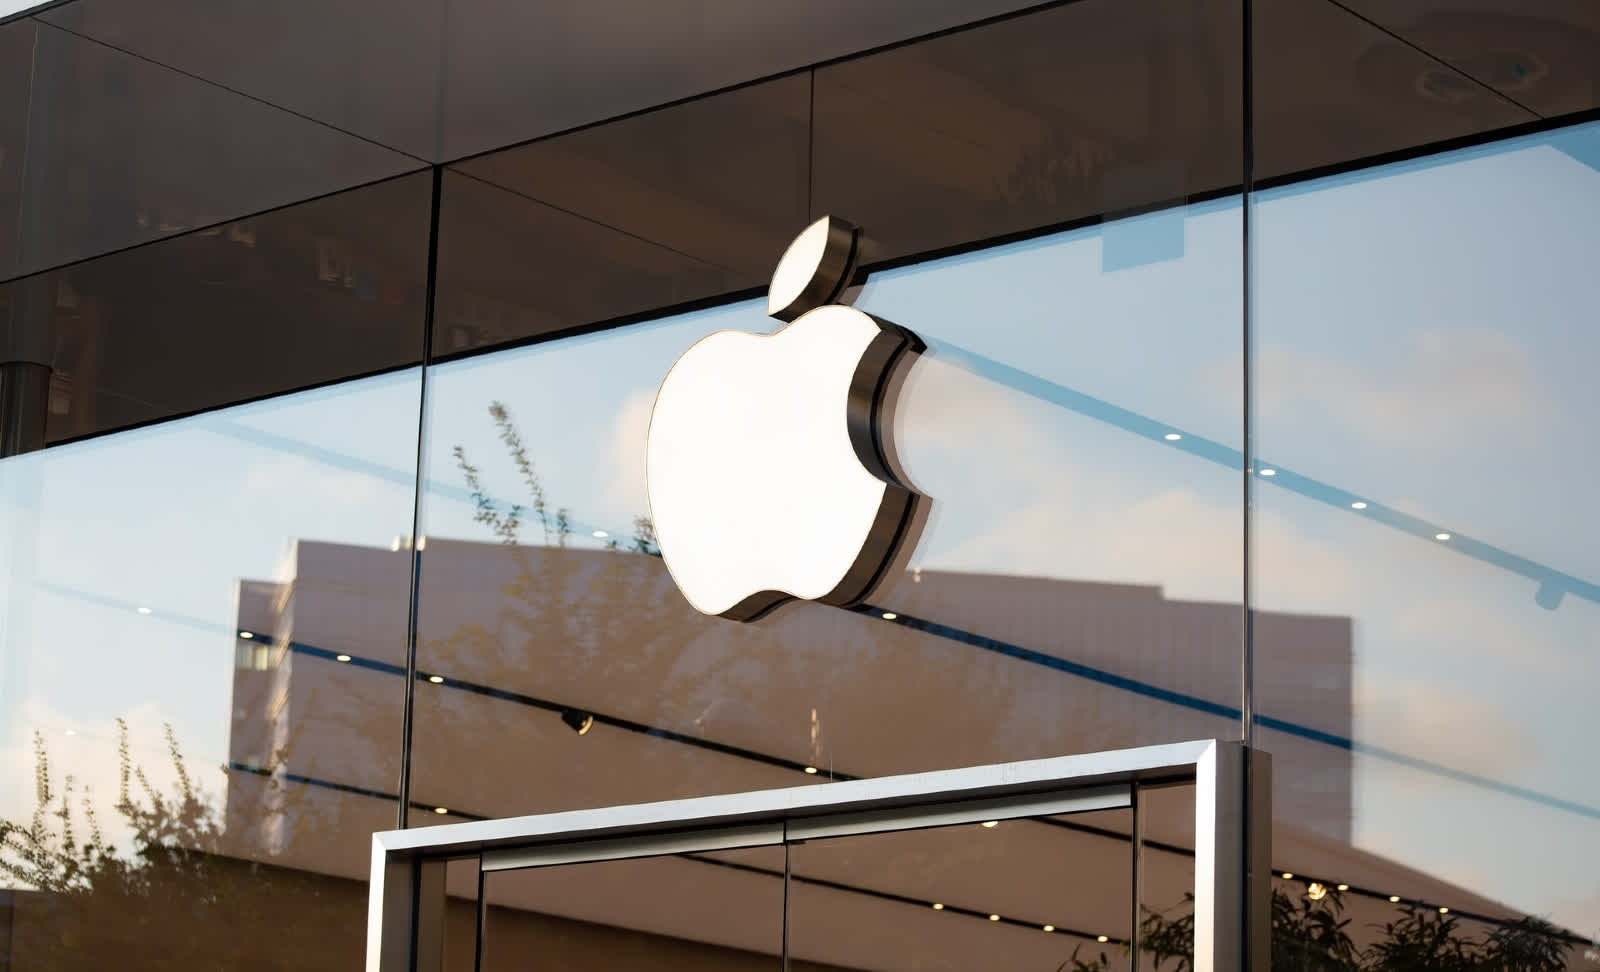 Former employee charged with defrauding Apple out of $10 million